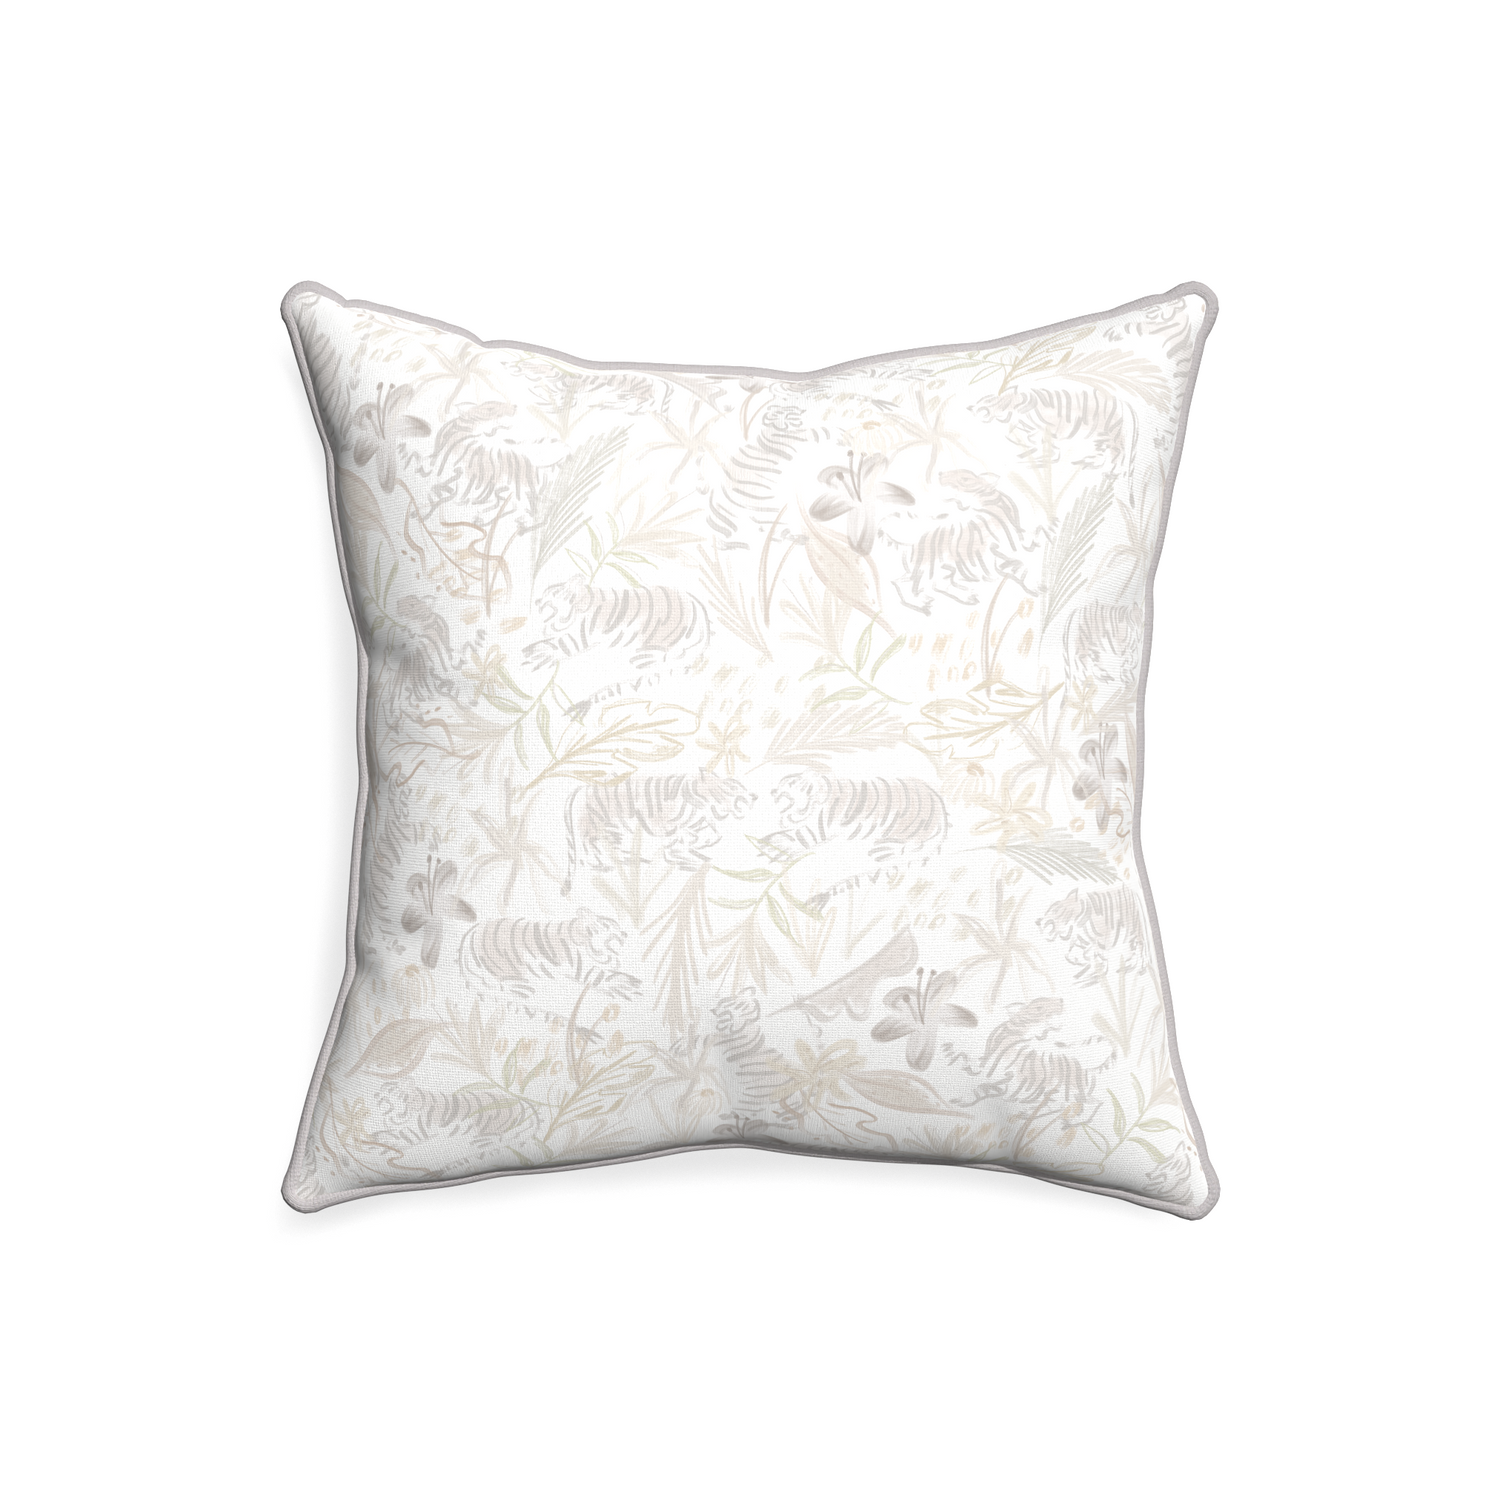 20-square frida sand custom beige chinoiserie tigerpillow with pebble piping on white background